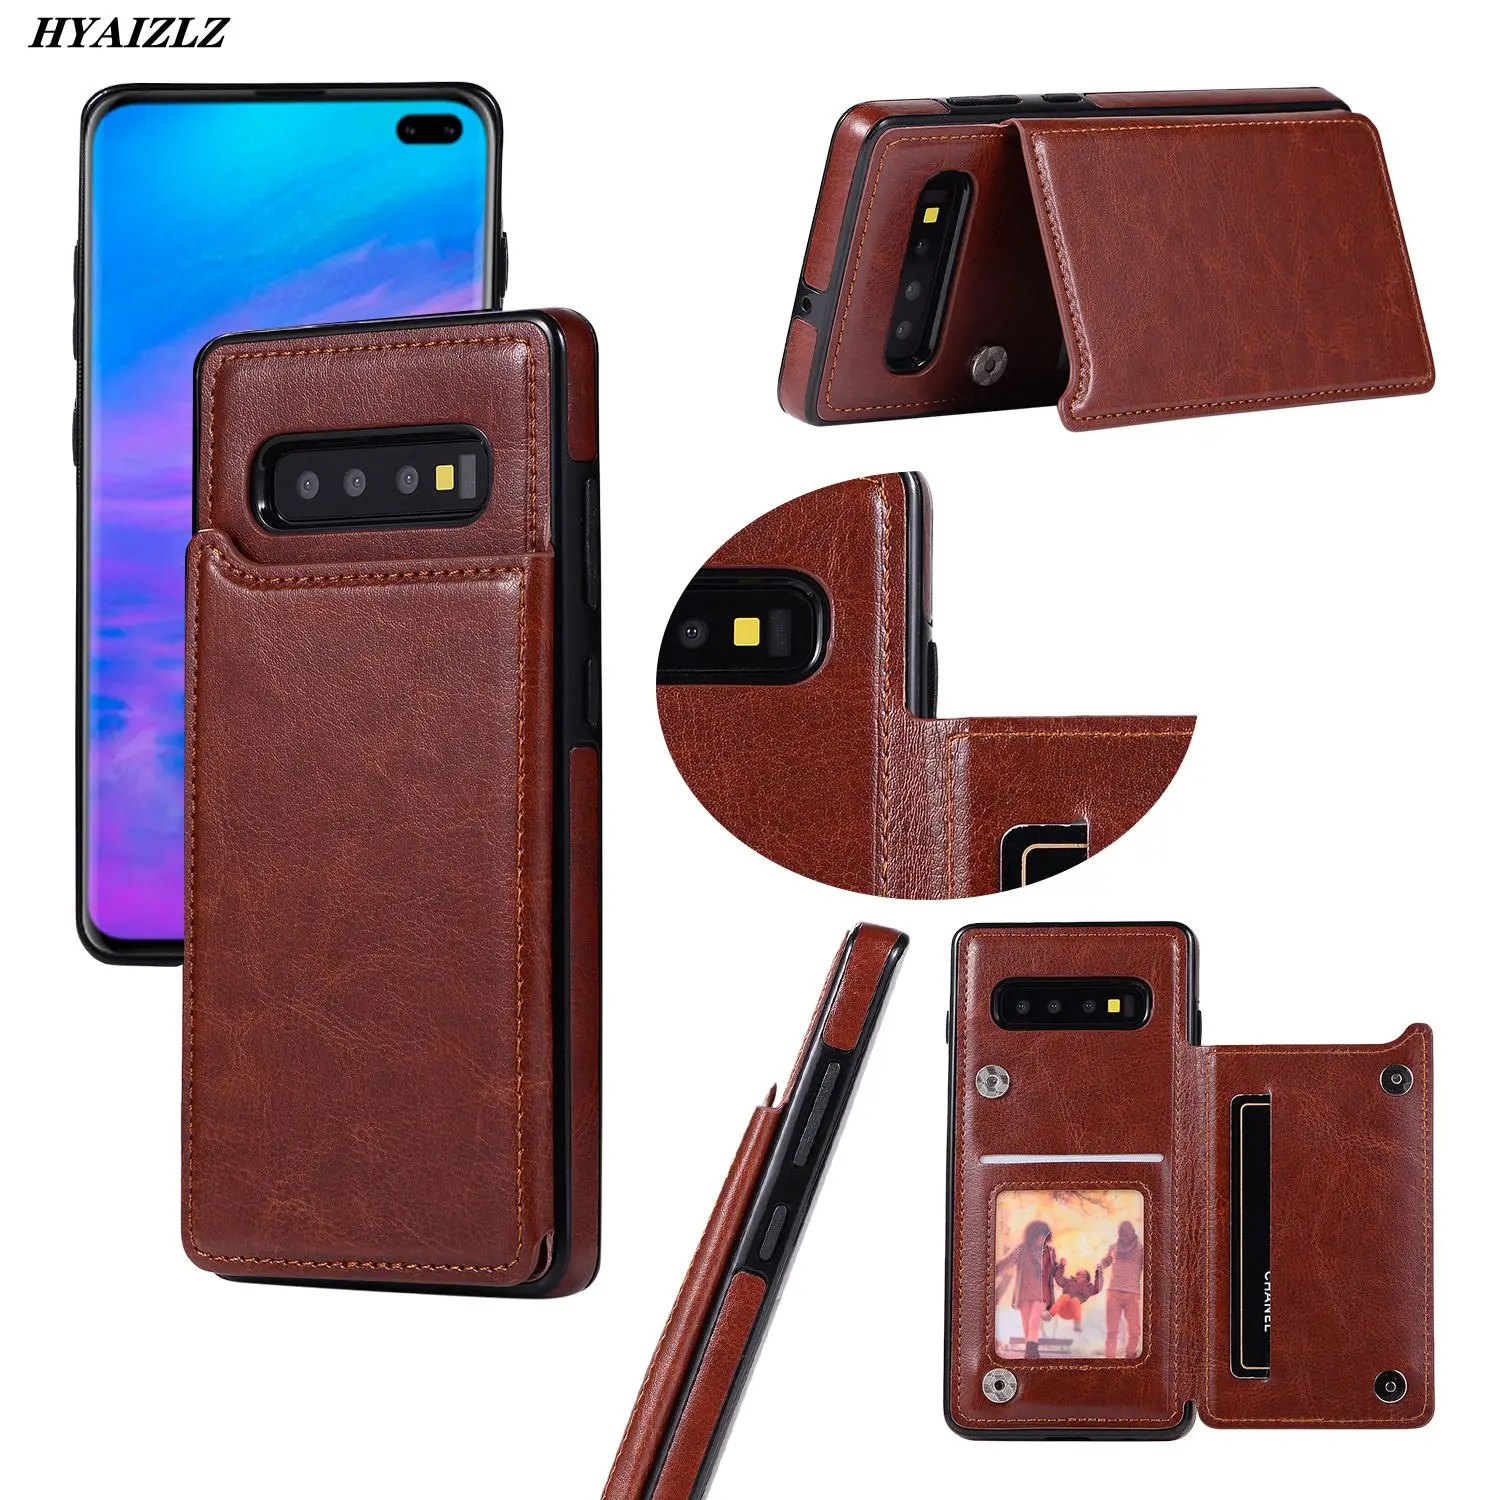 

Wallet Back Case for Galaxy Note 10 8 9 S10 S8 S9 Plus S10e Slim Cover Flip Pu Leather Card Slots Bracket Magnetic Phone Fundas